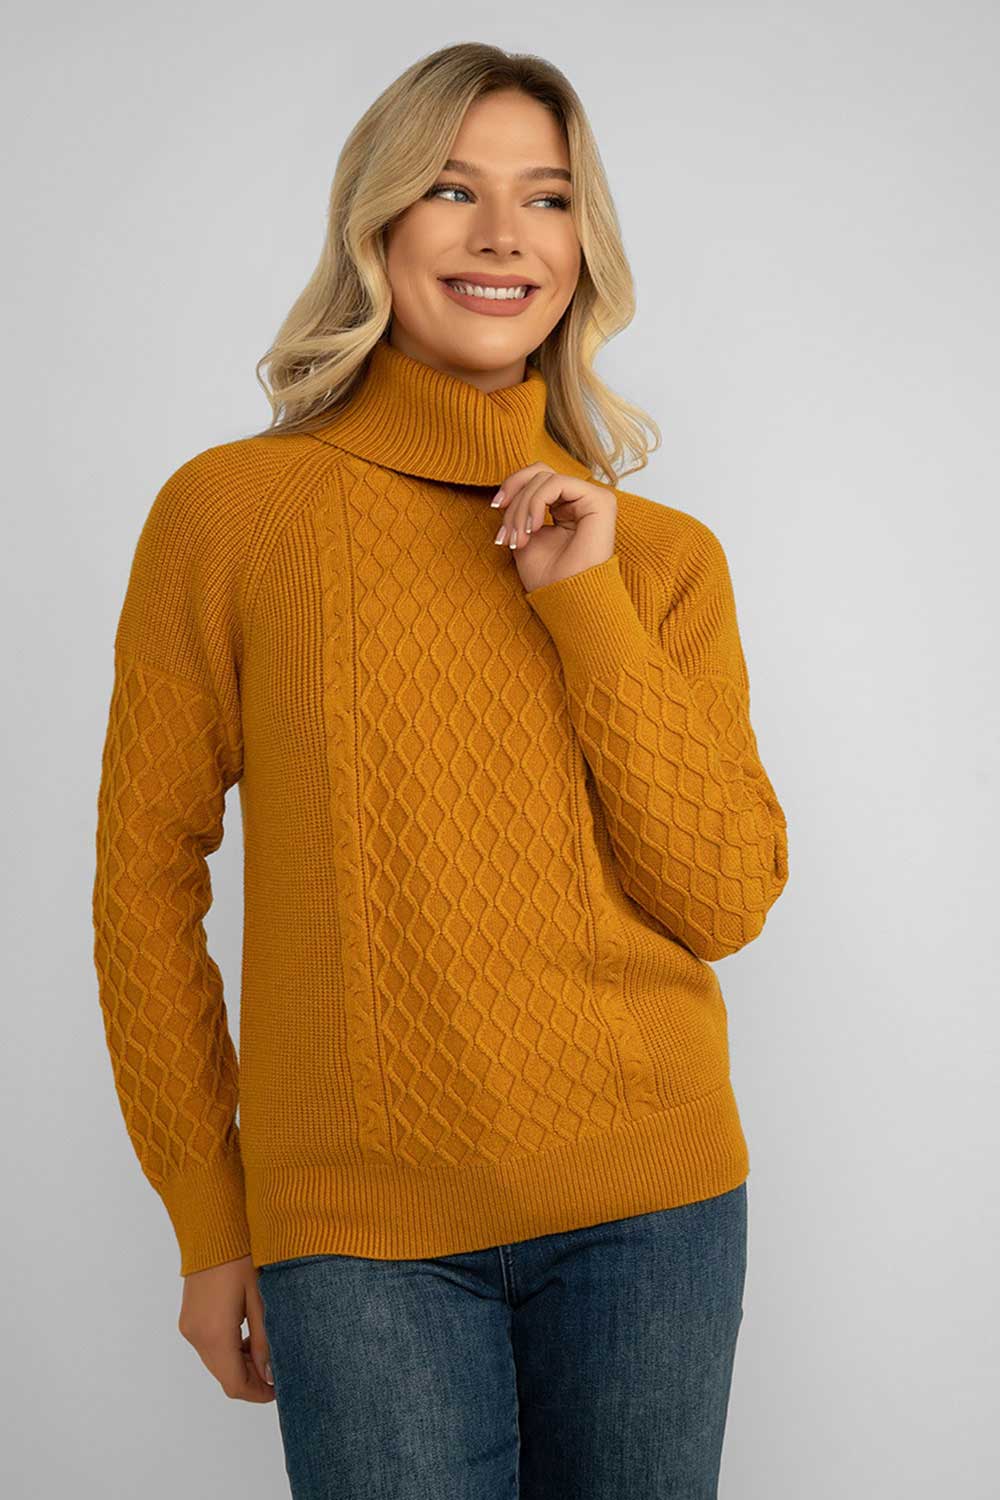 Women's Clothing ALISON SHERI (A42066) Cable Knit Turtleneck Sweater in AMBER